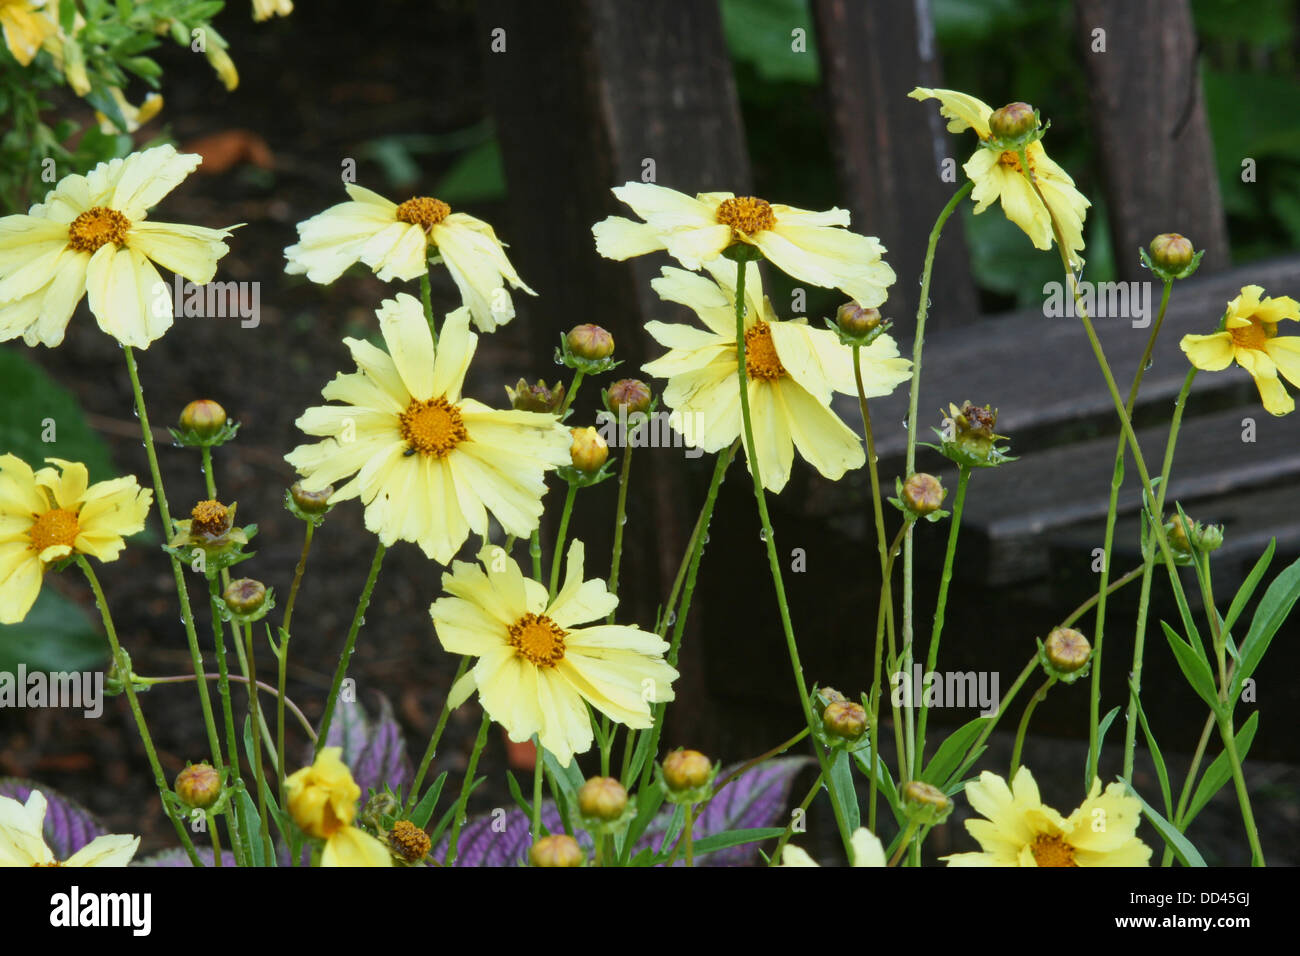 Yellow coreopsis flowers in a garden after the rain with wooden bench Stock Photo